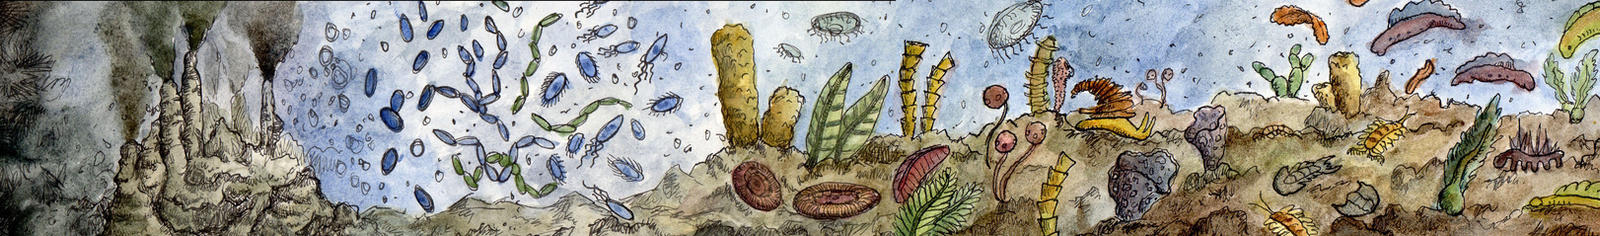 History of Life - Origin to Early Cambrian